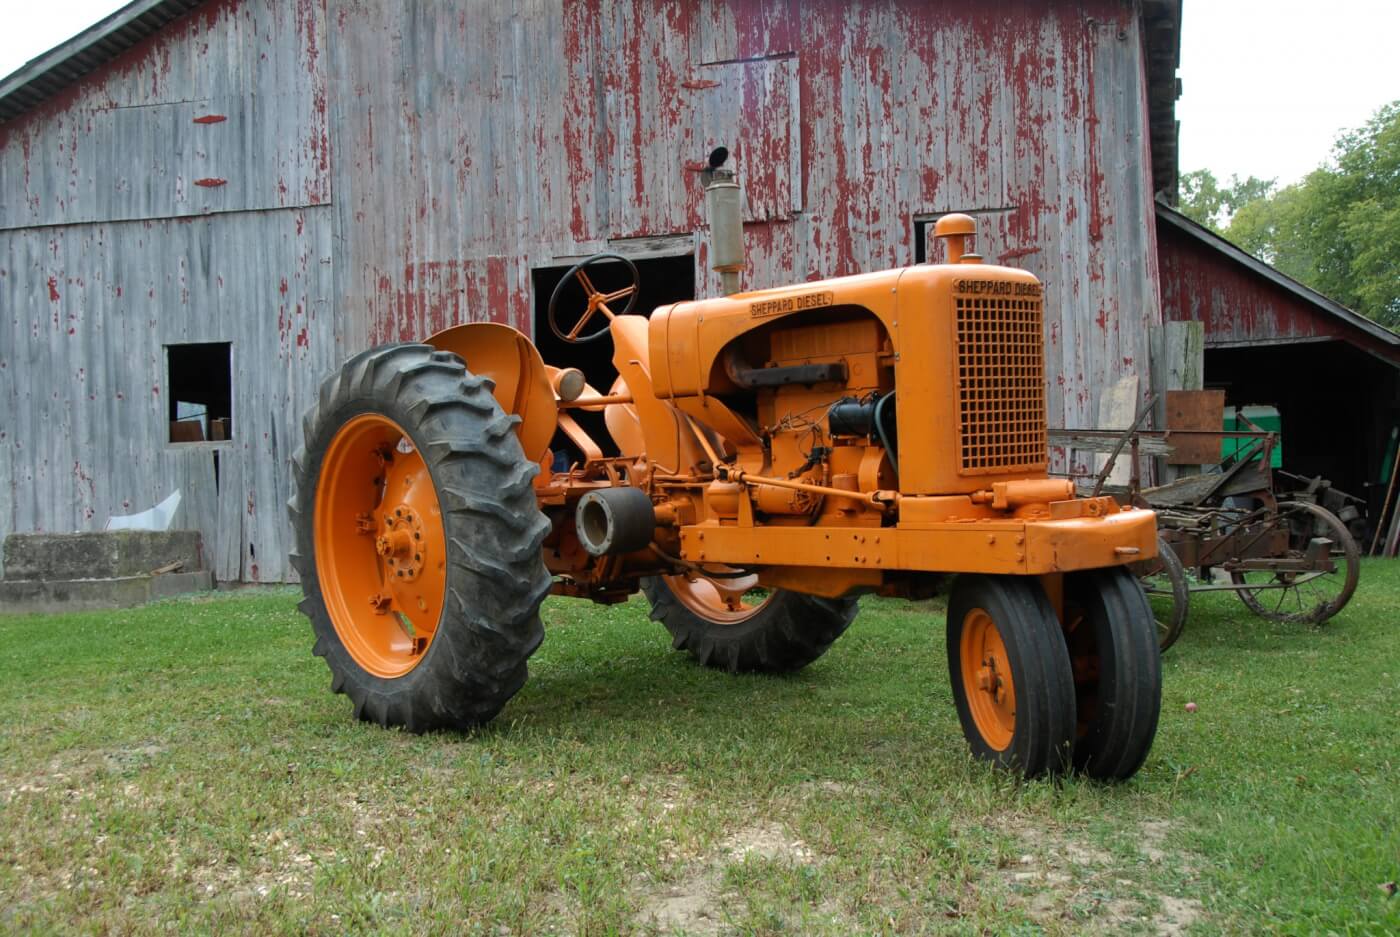 The Biller's 1950 SD-3 rowcrop was purchased with many of the bells and whistles, including both drum and live shaft PTO, live hydraulics and lights. Not ordered was the adjustable wide front axle, rear 3-point lift and big-bore engine. Base price was $2,995 but we don't have a price list for the extras. The tractor has a bit of an Allis-Chalmers look to it but the resemblance is only superficial and unintended.